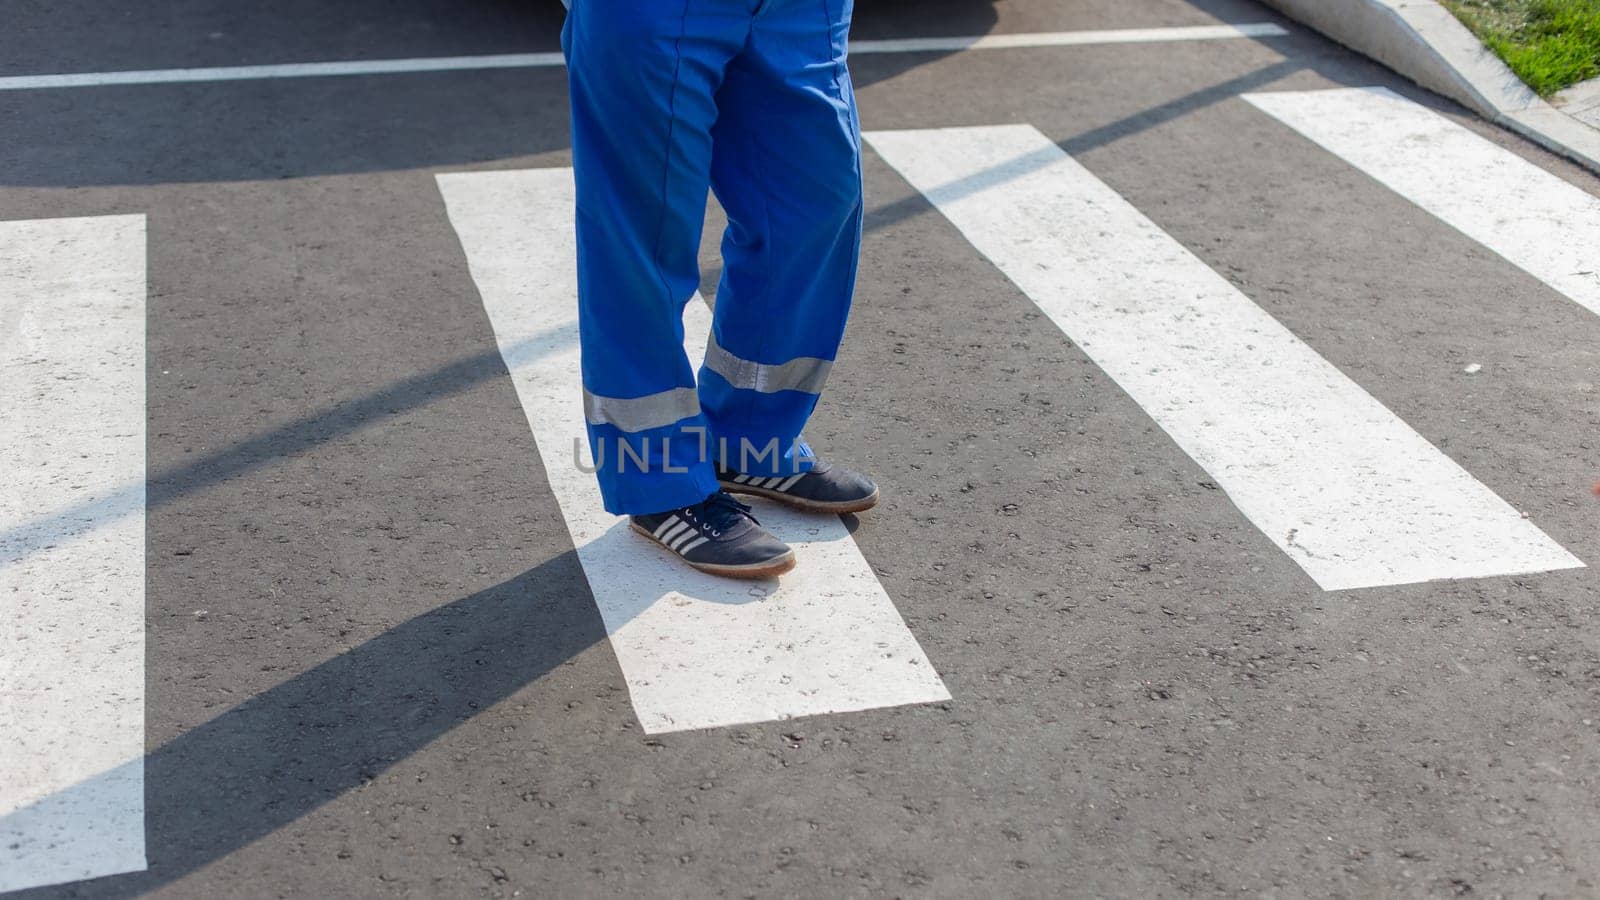 Partial view of a paramedic in blue uniform standing on a zebra crossing, focus on feet